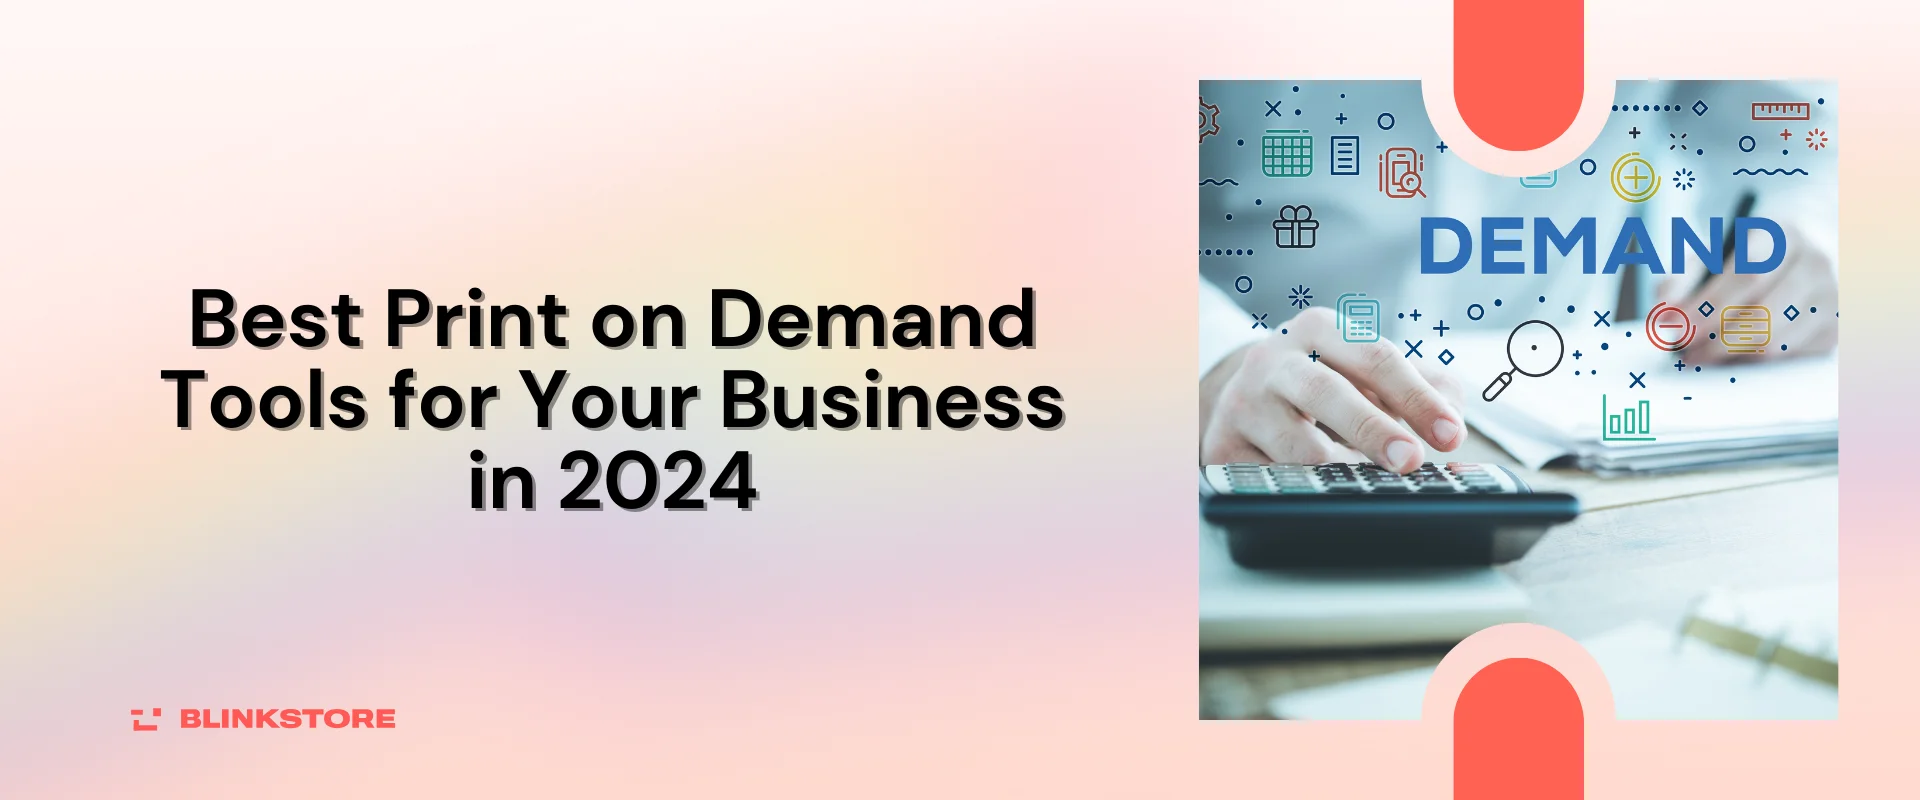 Best Print on Demand Tools for Your Business in 2024